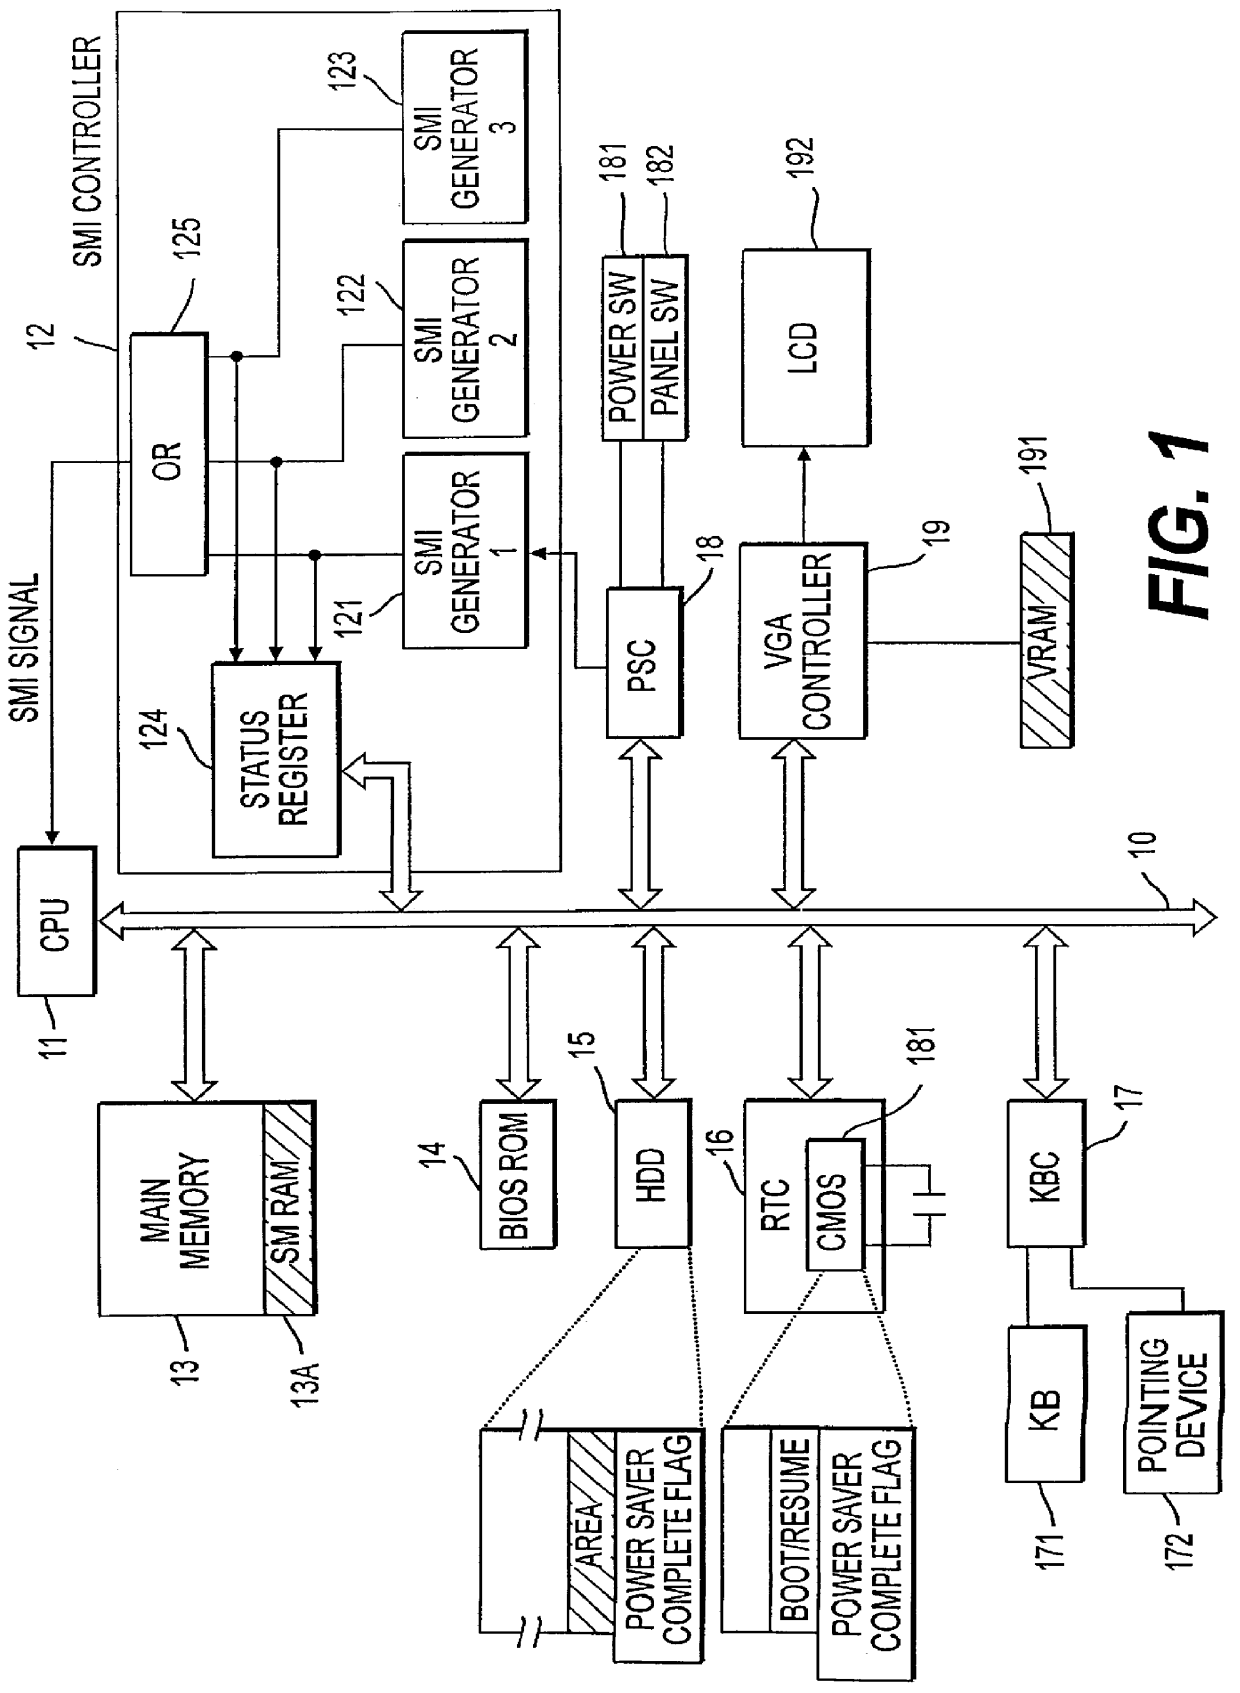 System for controlling a power saving mode in a computer system